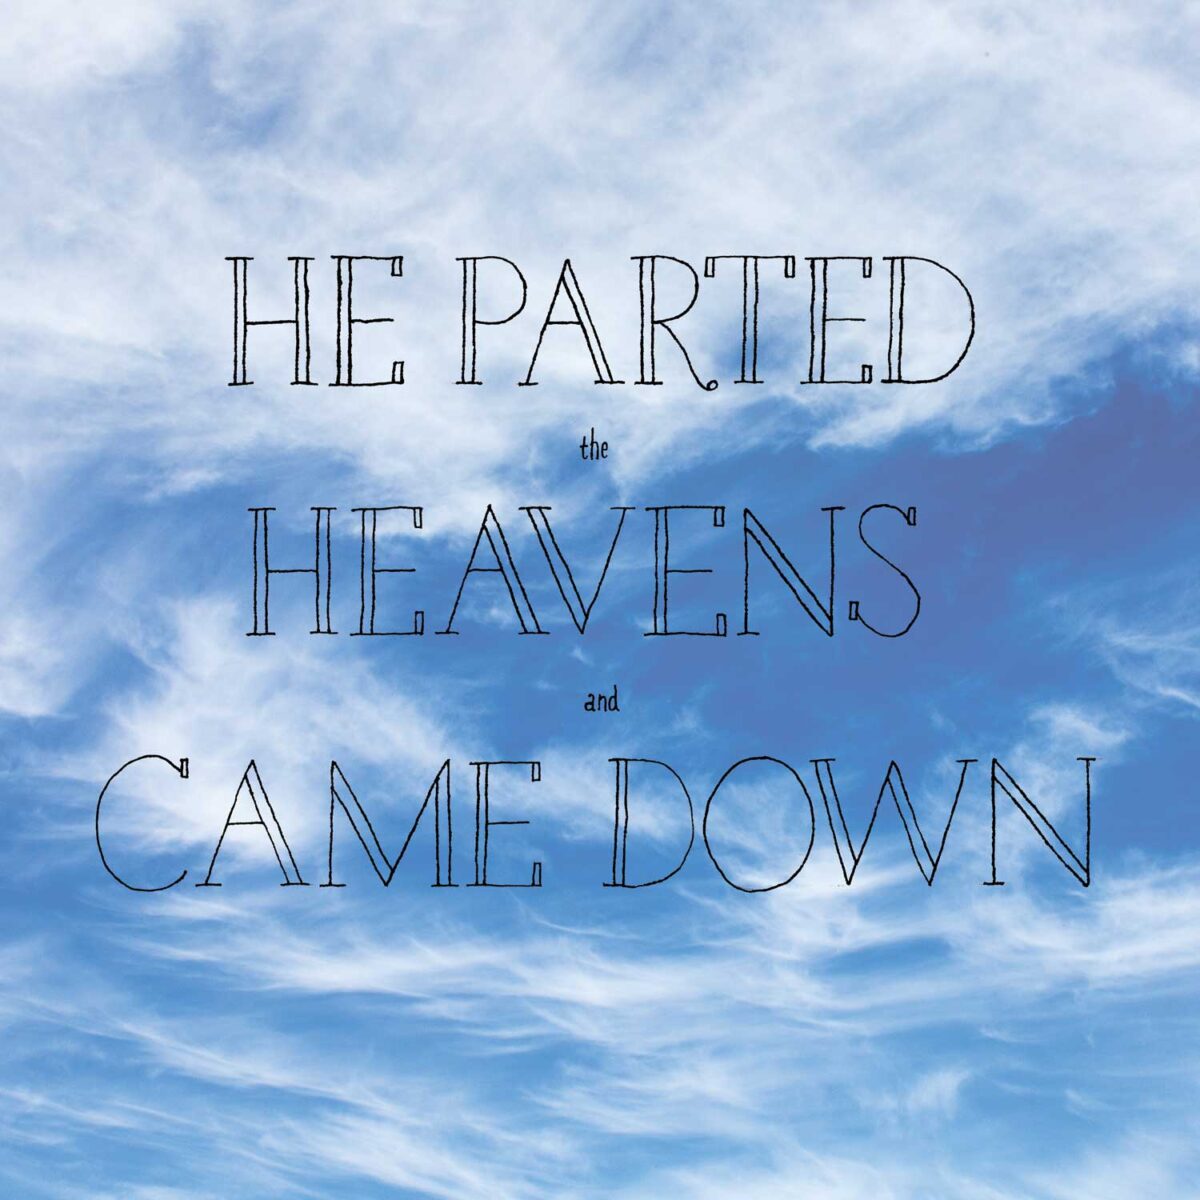 Hand Lettering on a photo of clouds that reads: he parted the heavens and came down.